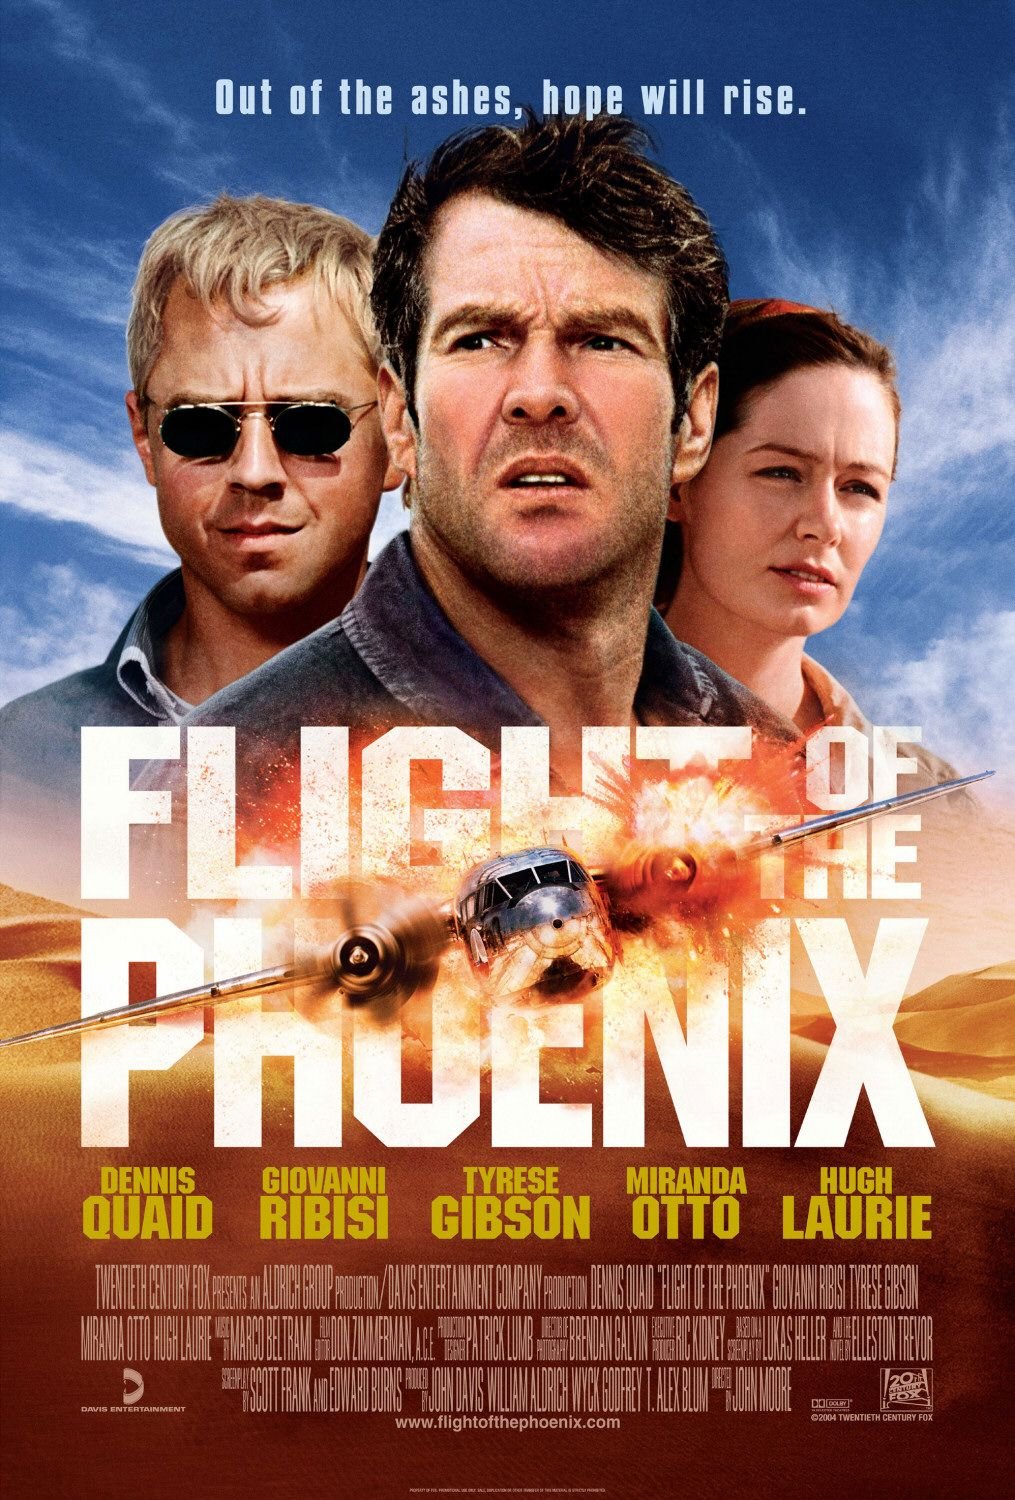 Poster of the movie The Flight of the Phoenix